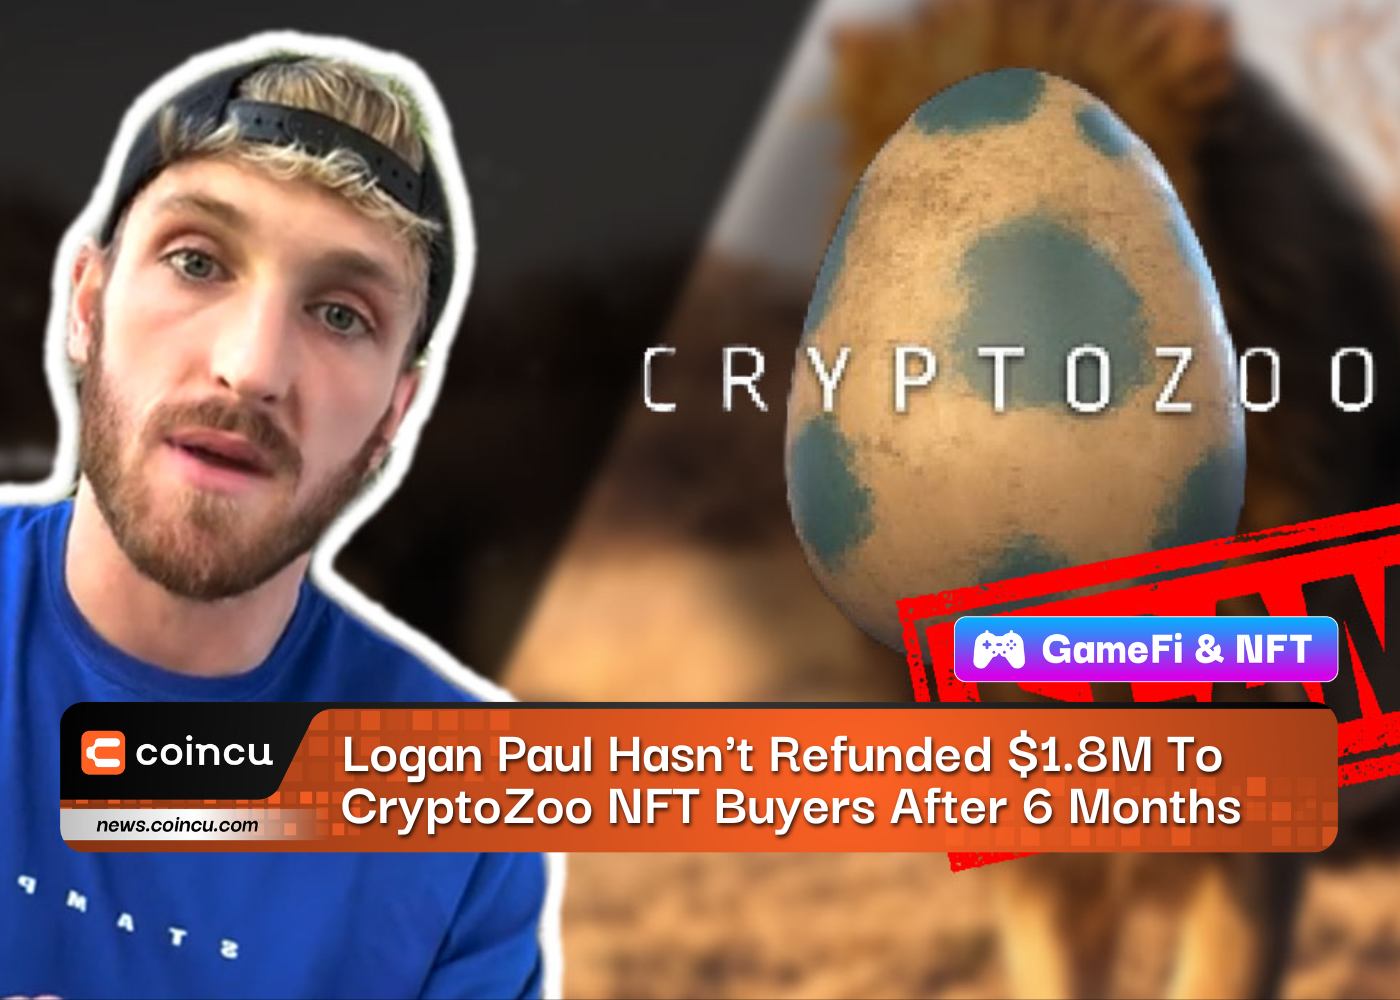 Logan Paul Hasn't Refunded $1.8M To CryptoZoo Scam NFT Buyers After 6 Months